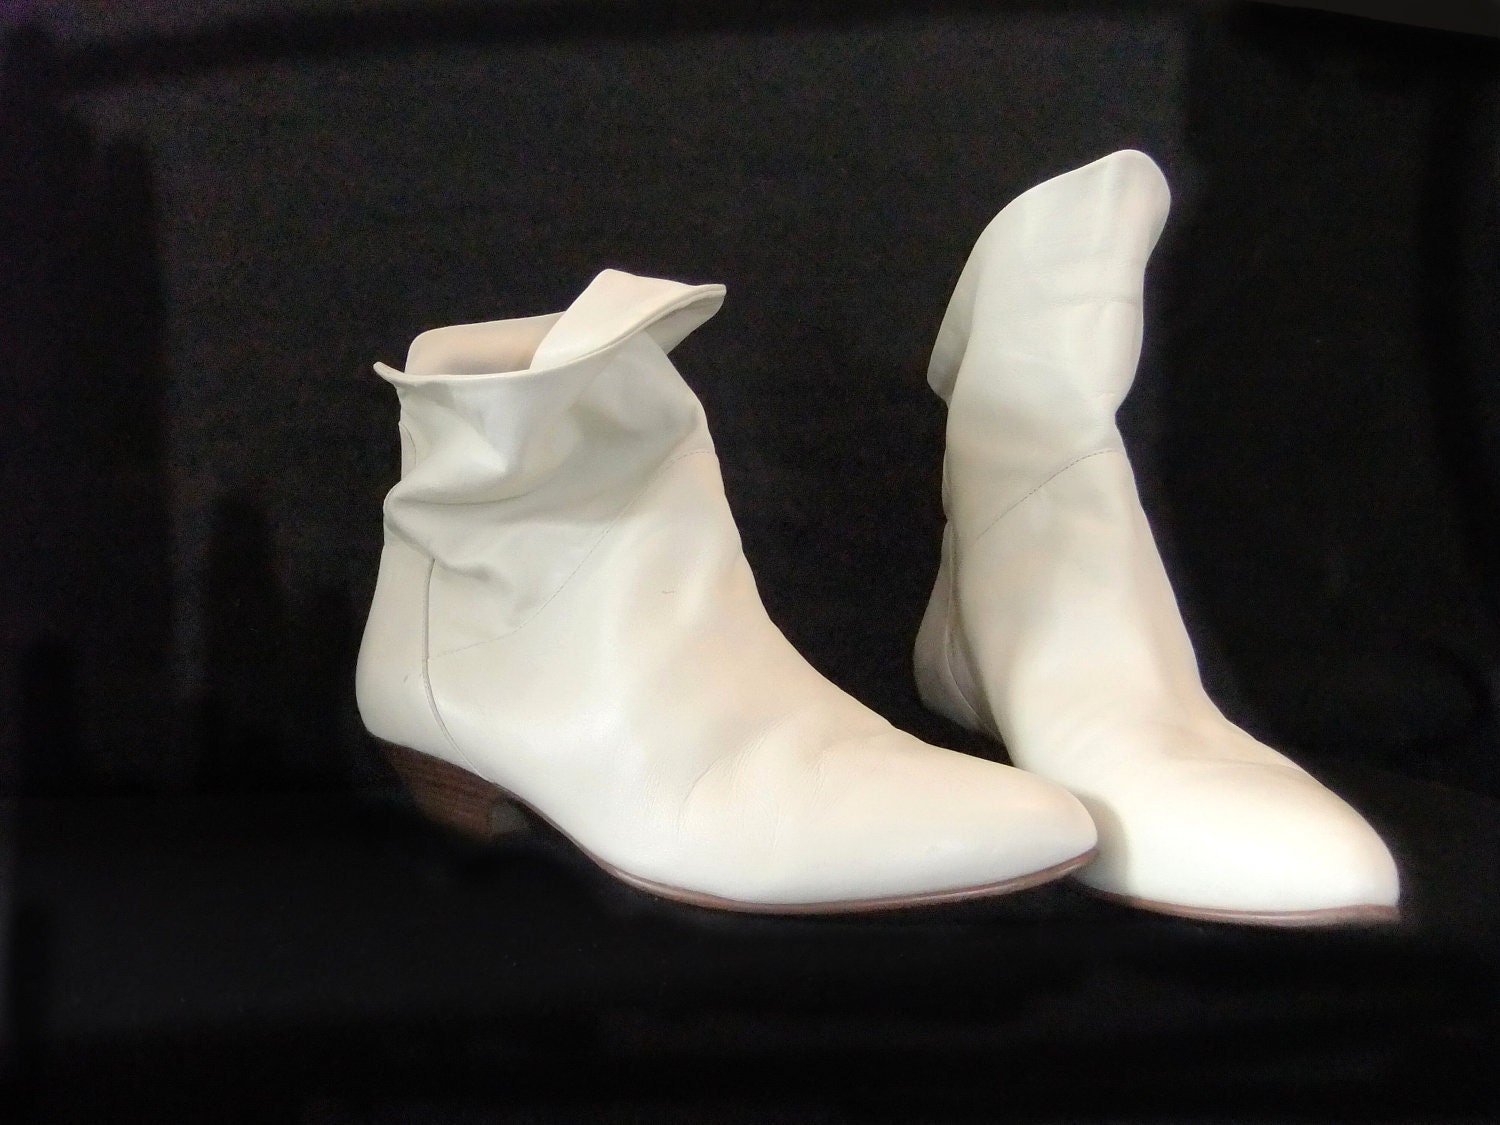 ankle boots leather off white go go boots mod boots